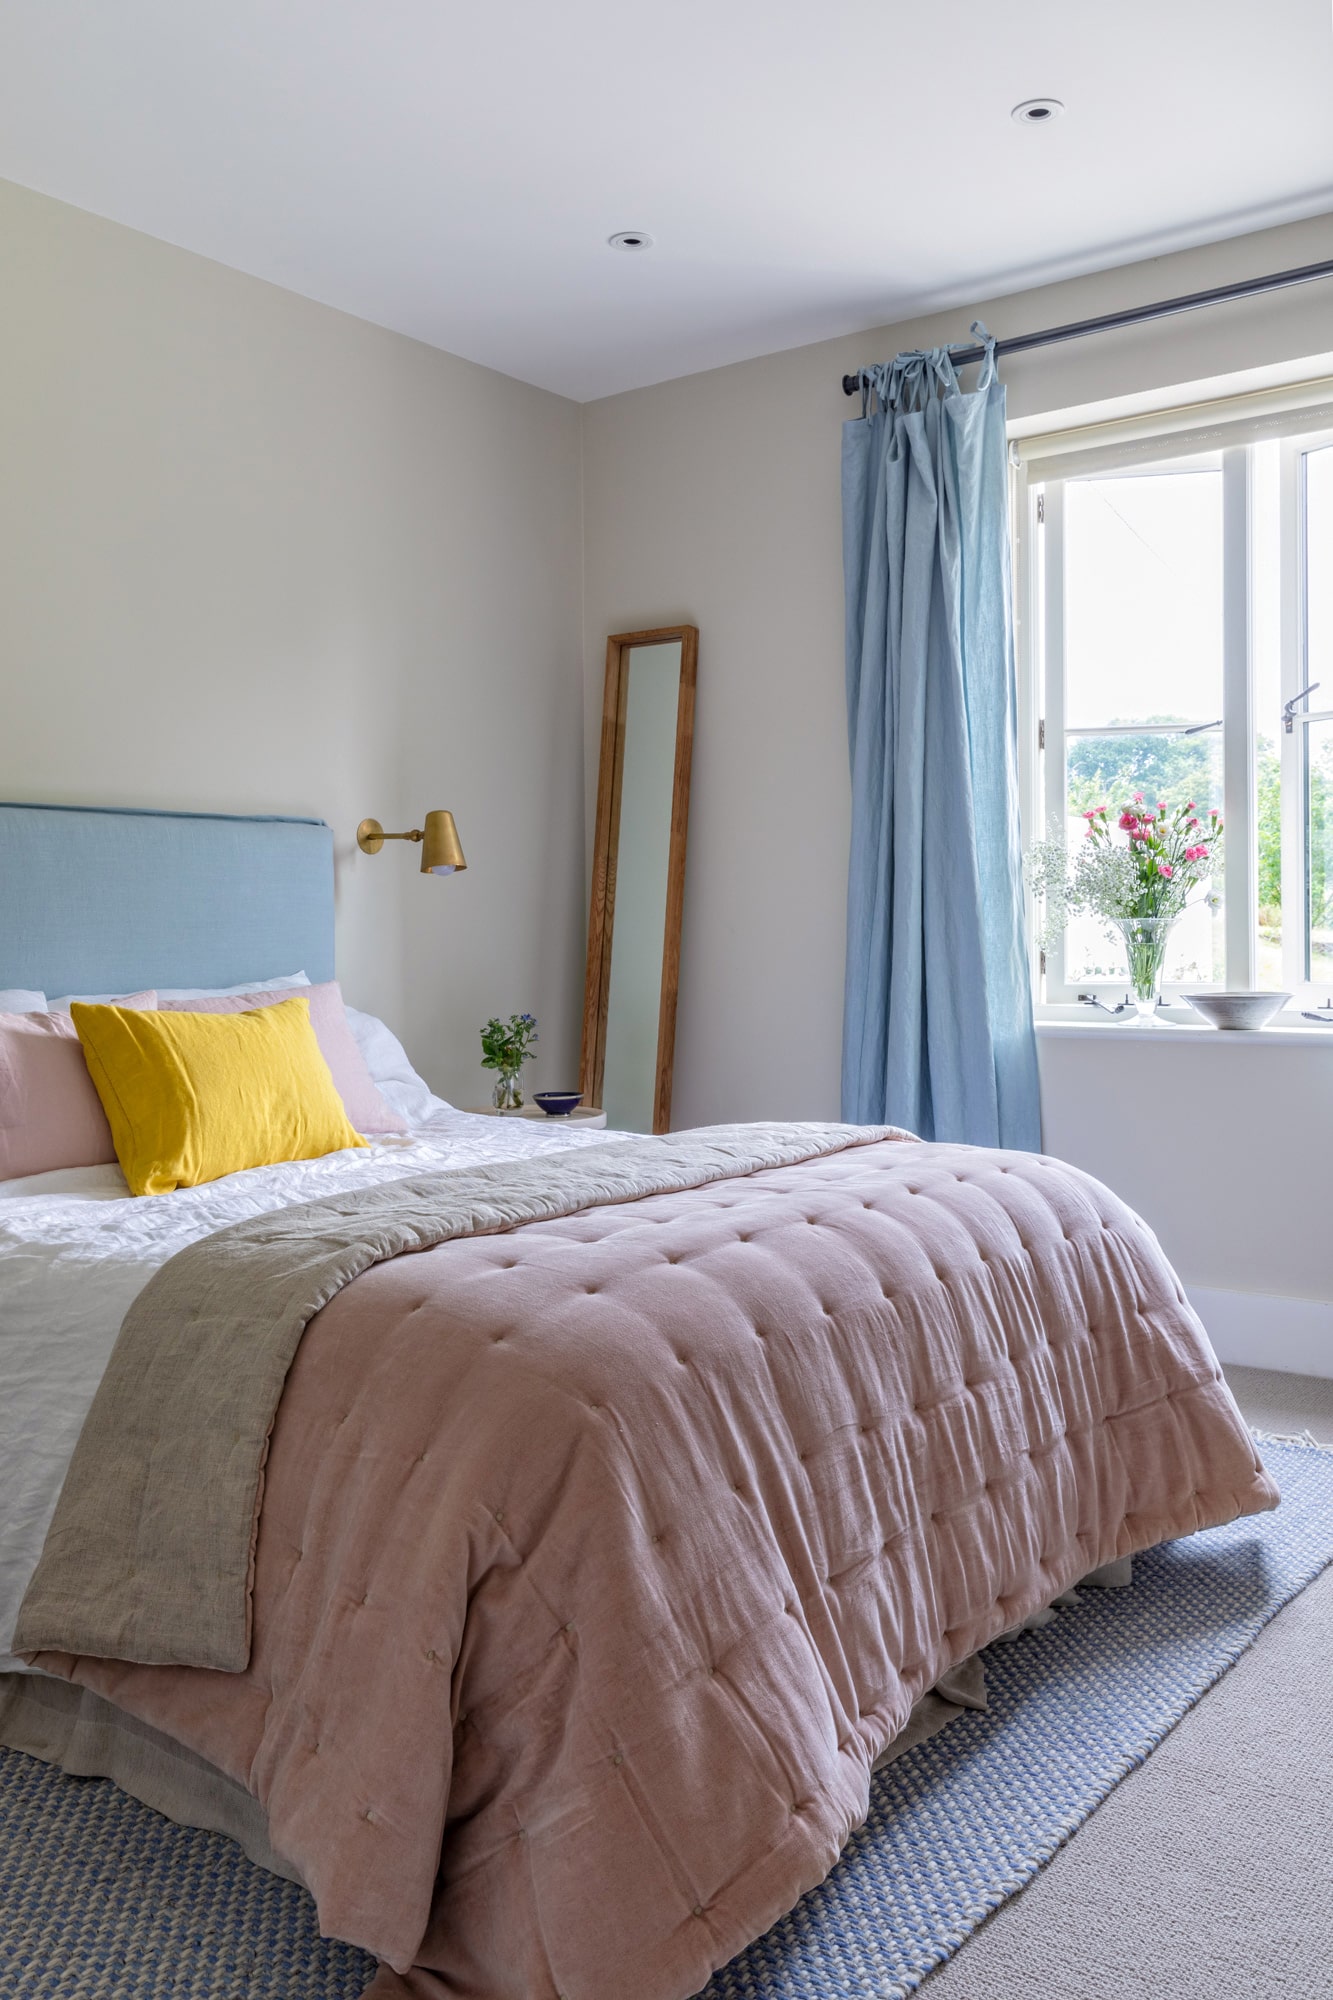 interior: bedroom in pink and blue colours with yellow details